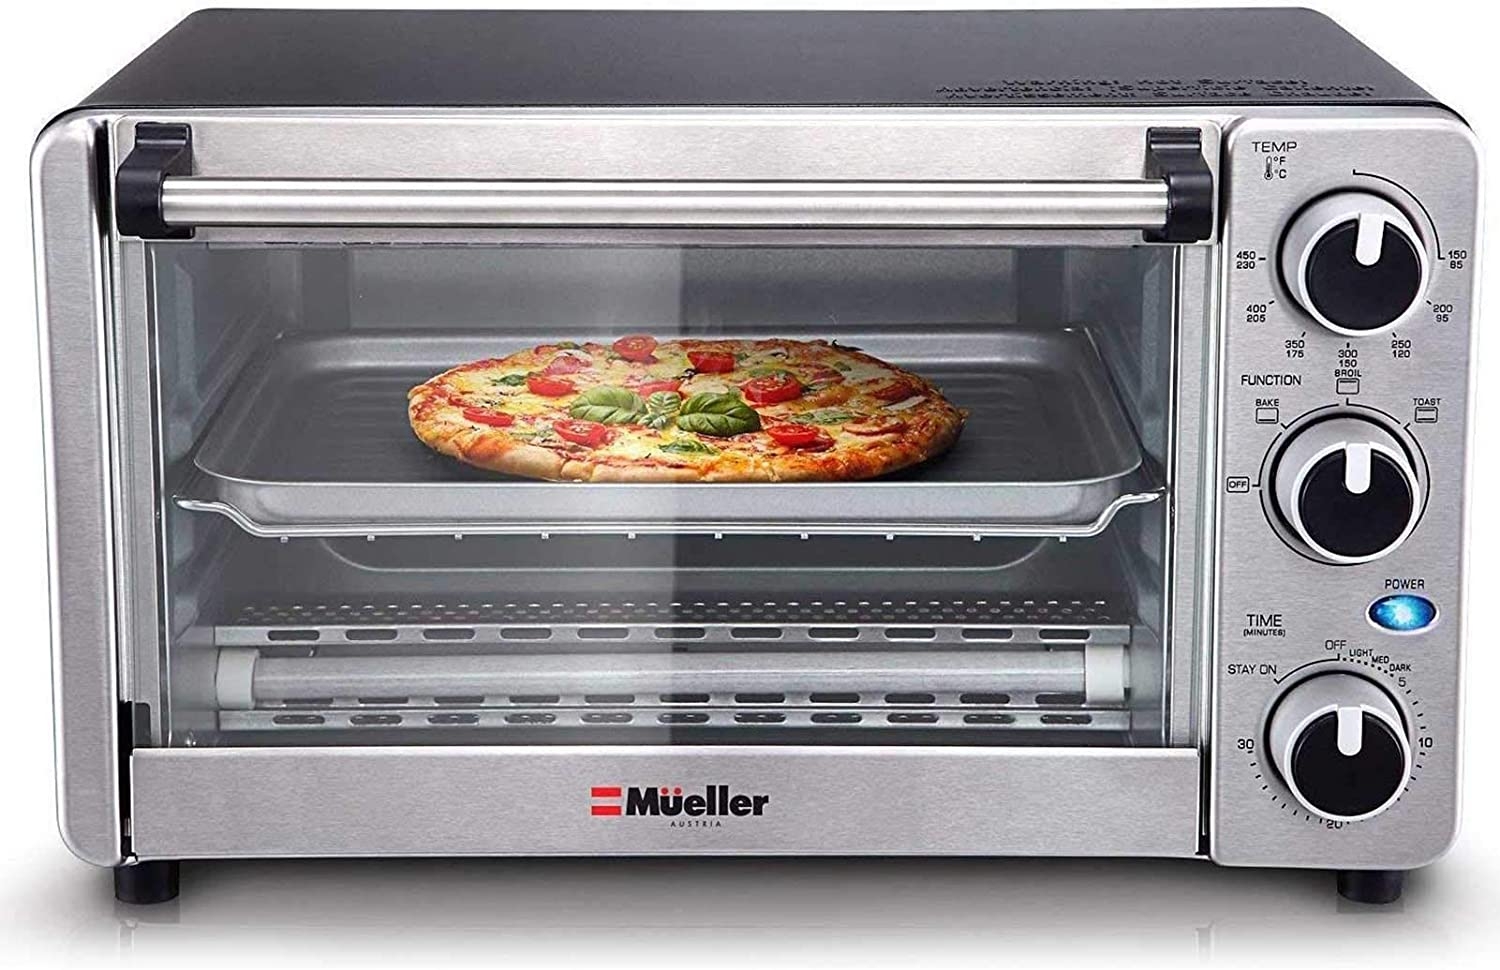 Toaster Oven 4 Slice, Multi-function Stainless Steel Finish with Timer – Toast – Bake – Broil Settings, Natural Convection –